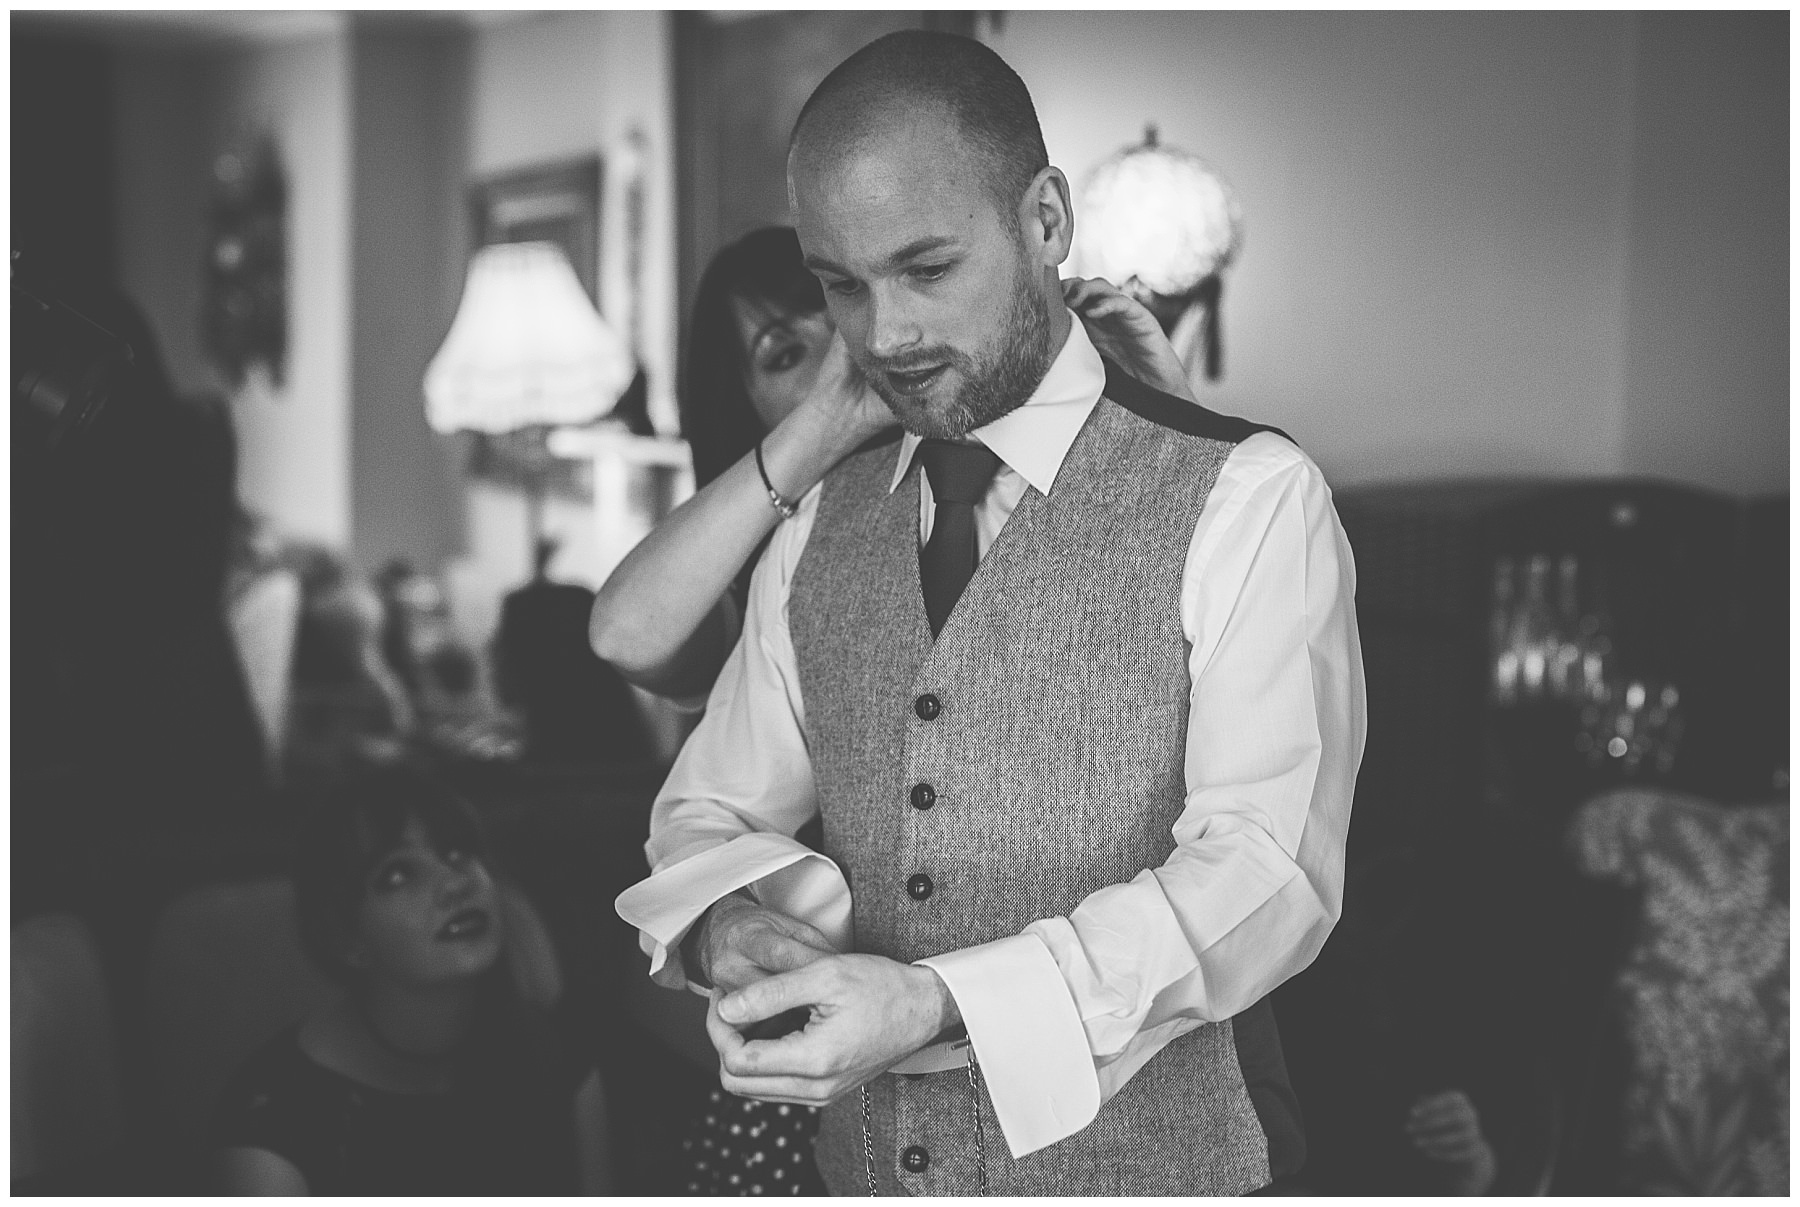 Groom applies his finishing touches before the wedding